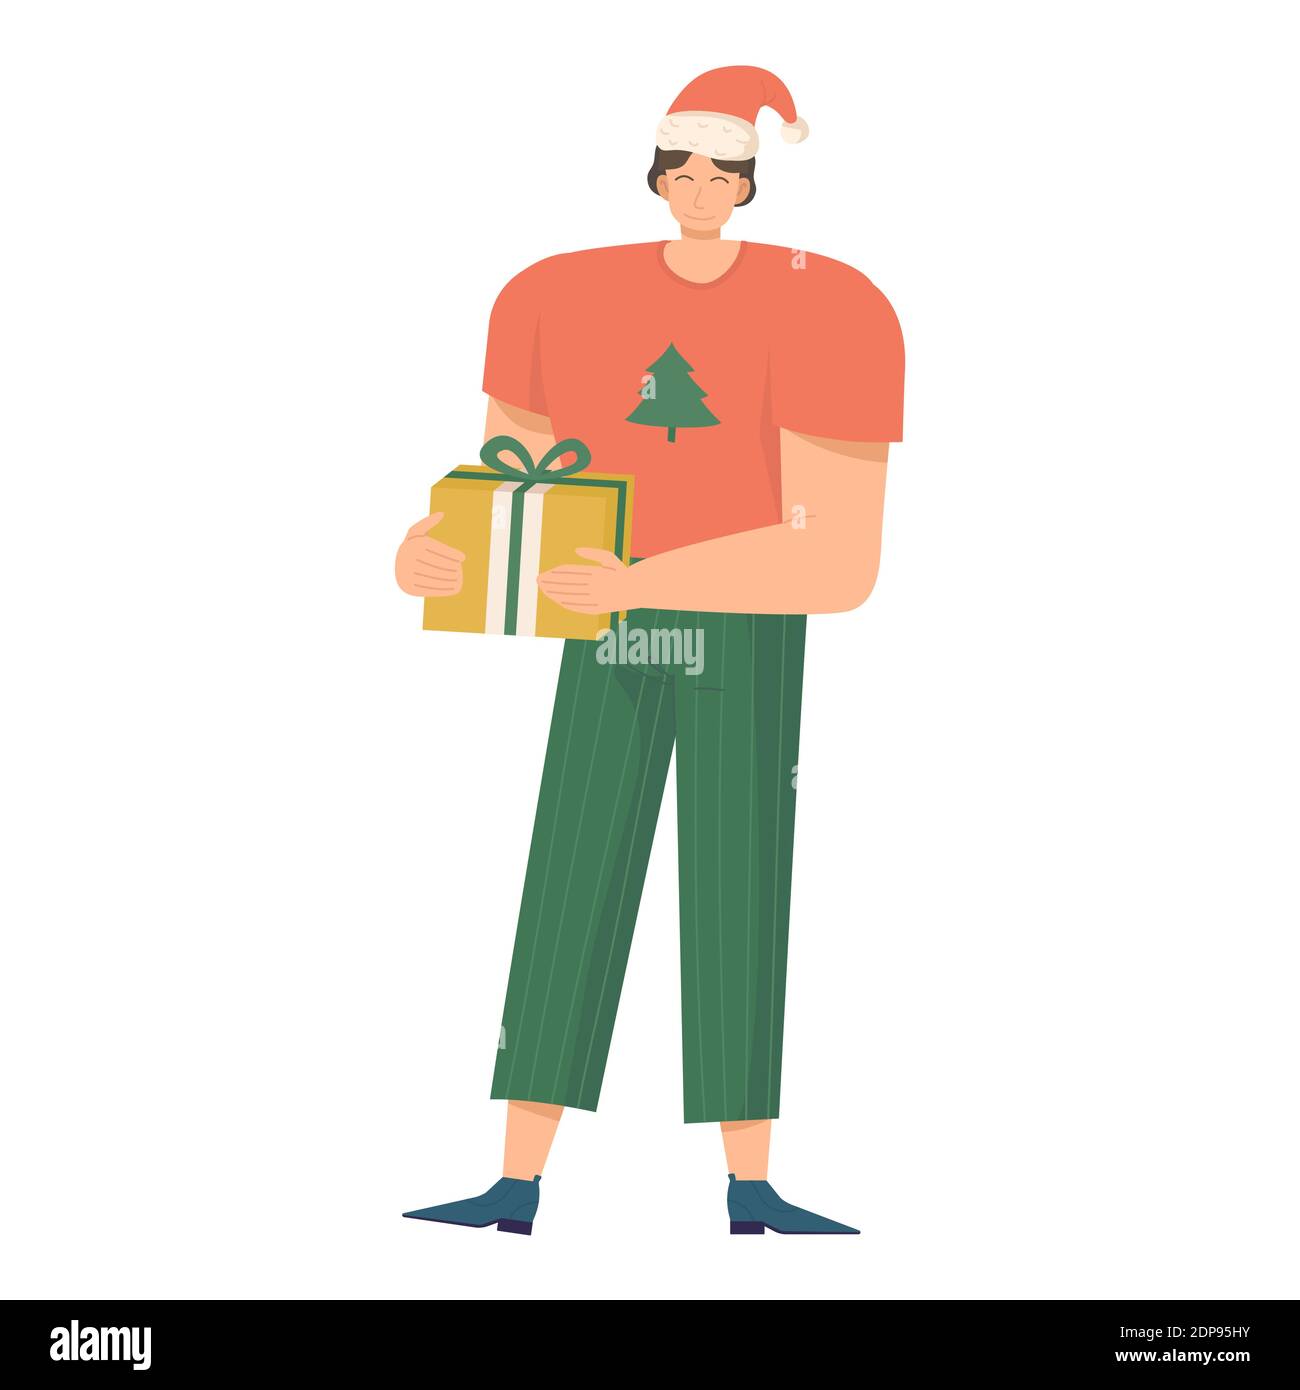 Celebrating man holding a giftbox. Home Christmas, cozy holidays, secret Santa exchange, give and receive gift, surprise box concept. Stock vector Stock Vector